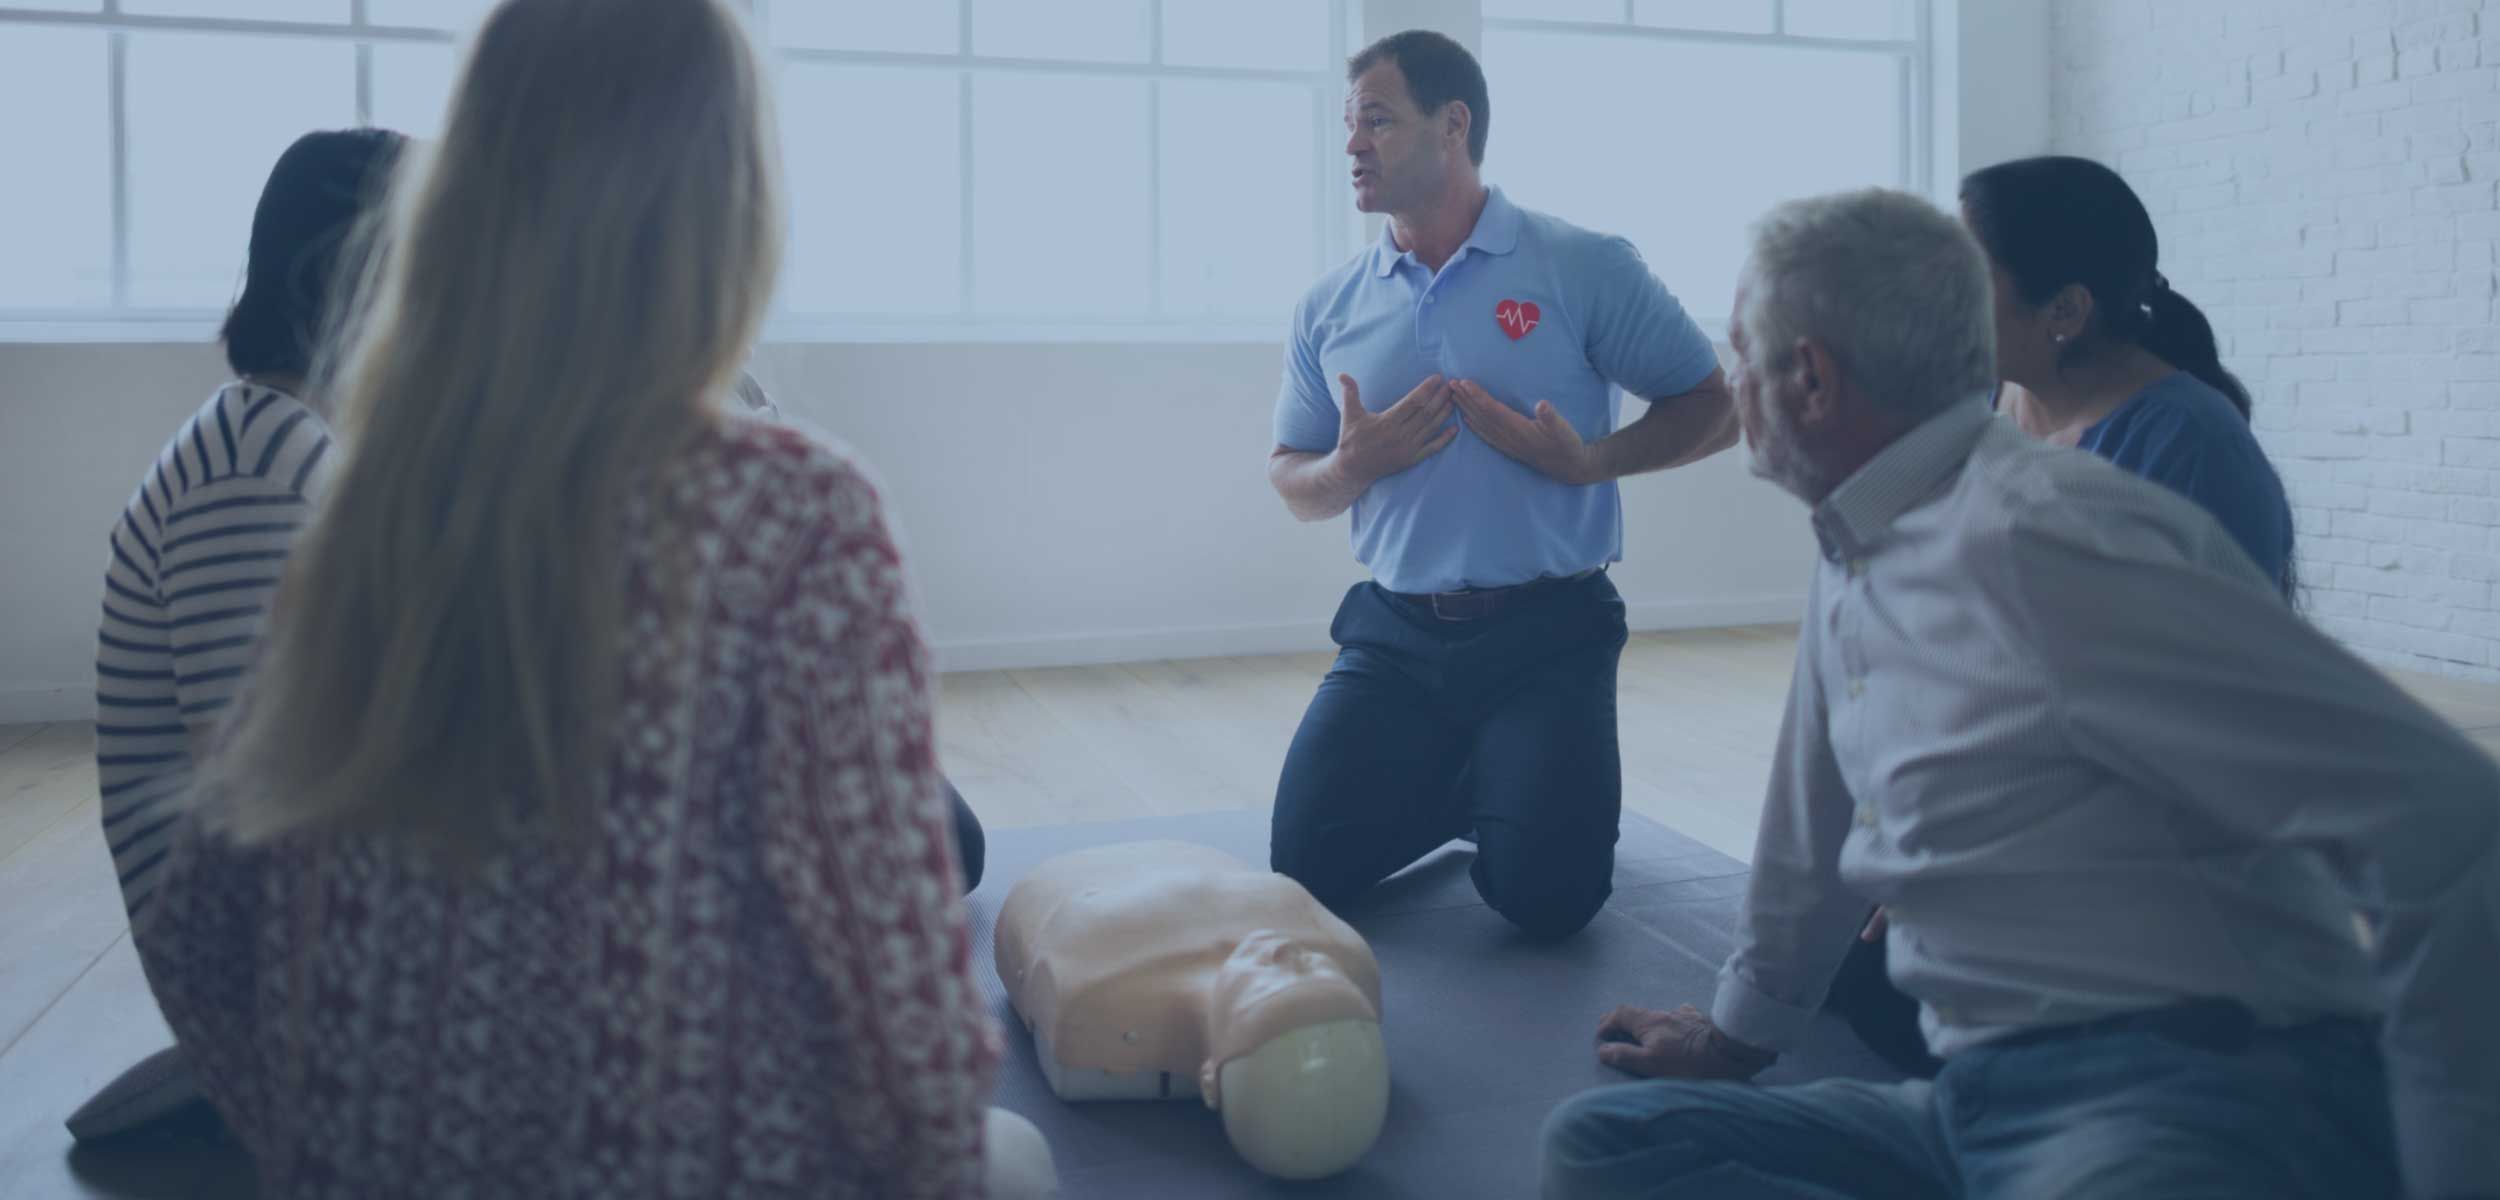 Go Life Savers Instructors teaching first aid